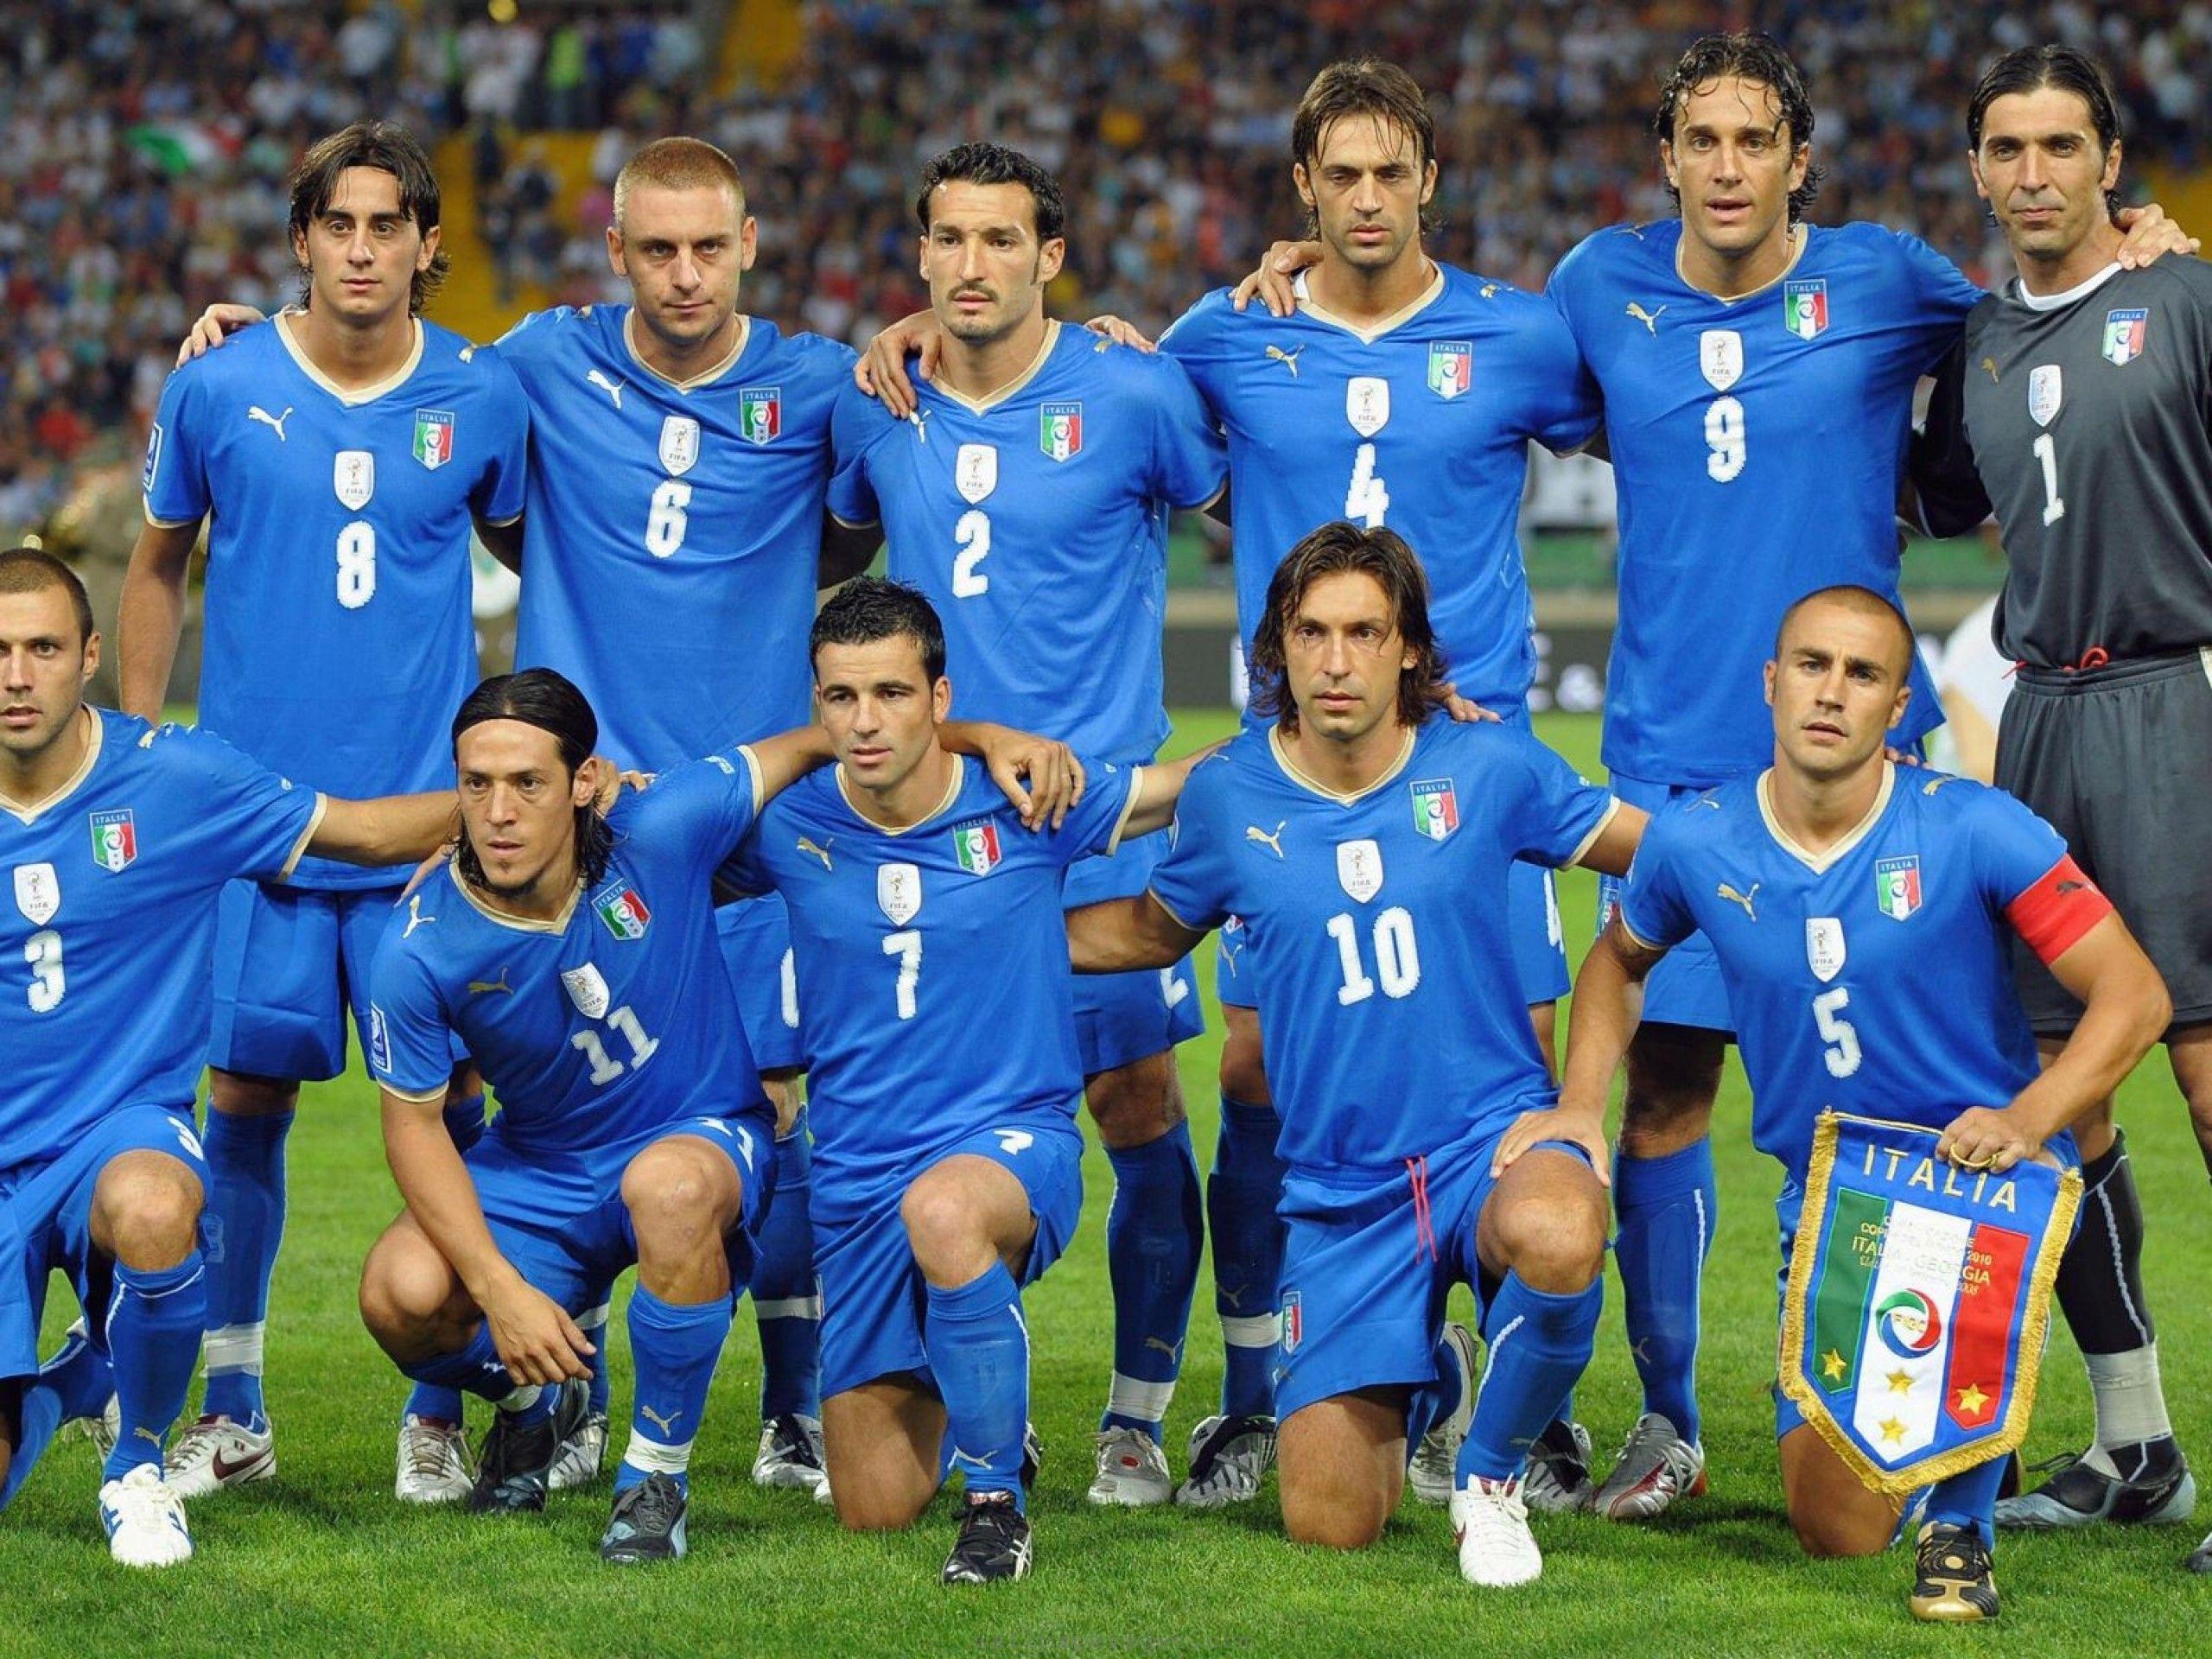 Wallpaper.wiki Italy National Football Team Photos PIC WPC004106